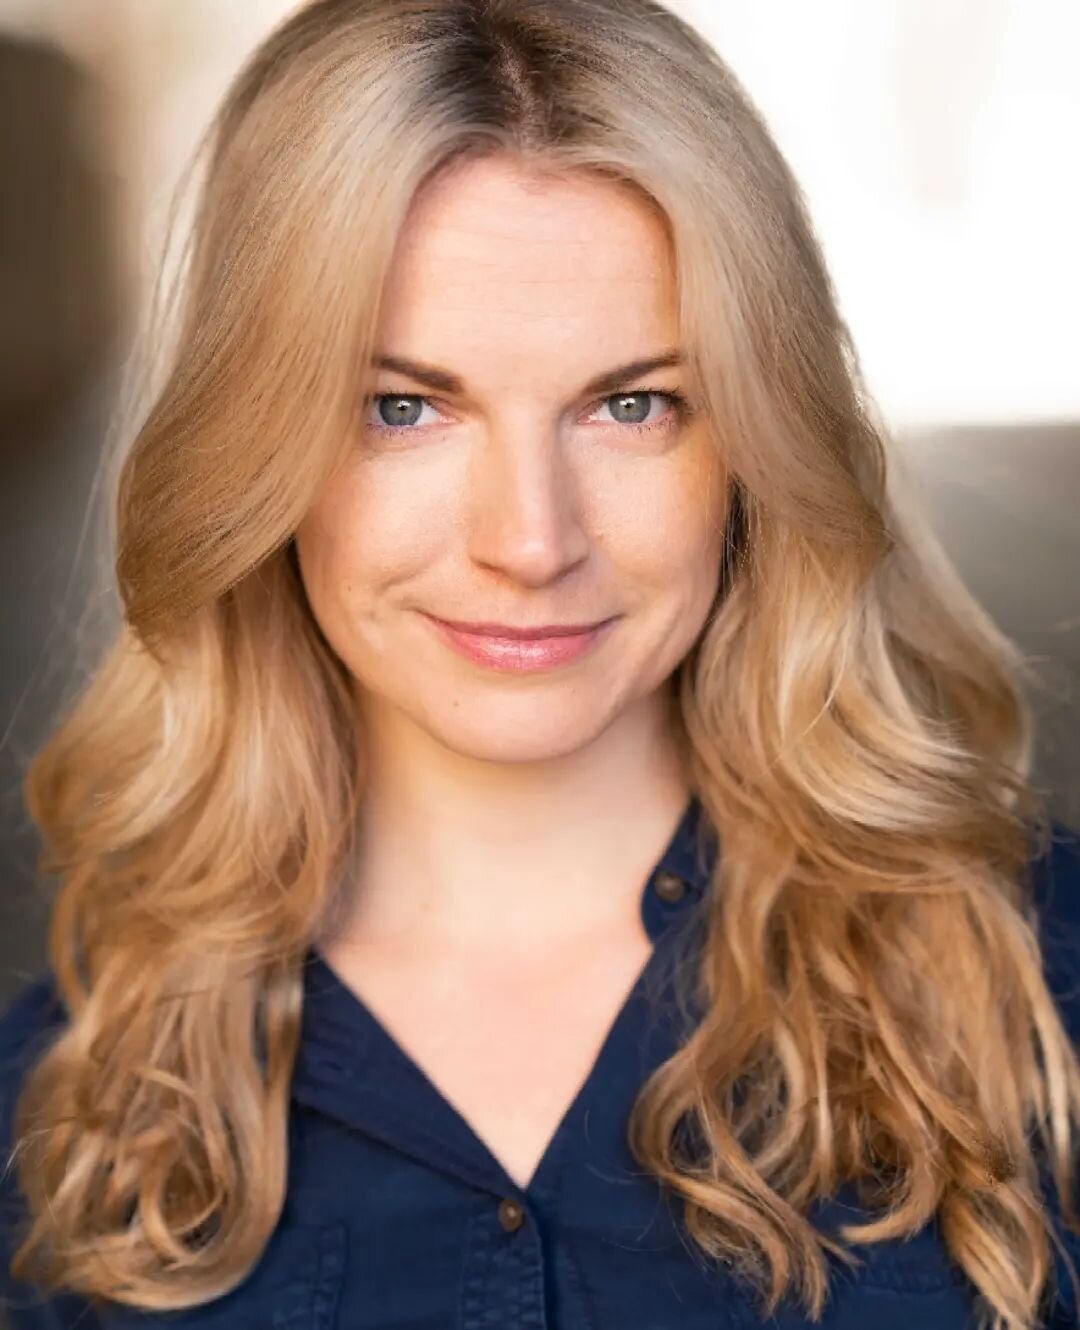 Name: Rebecca Ward
Playing age: 26-34

Rebecca is a British/Finnish actor and voiceover artist who grew up in Greater London where she has worked for over 6 years in theatre, film, television, radio and commercials. Travelling between London and Hels